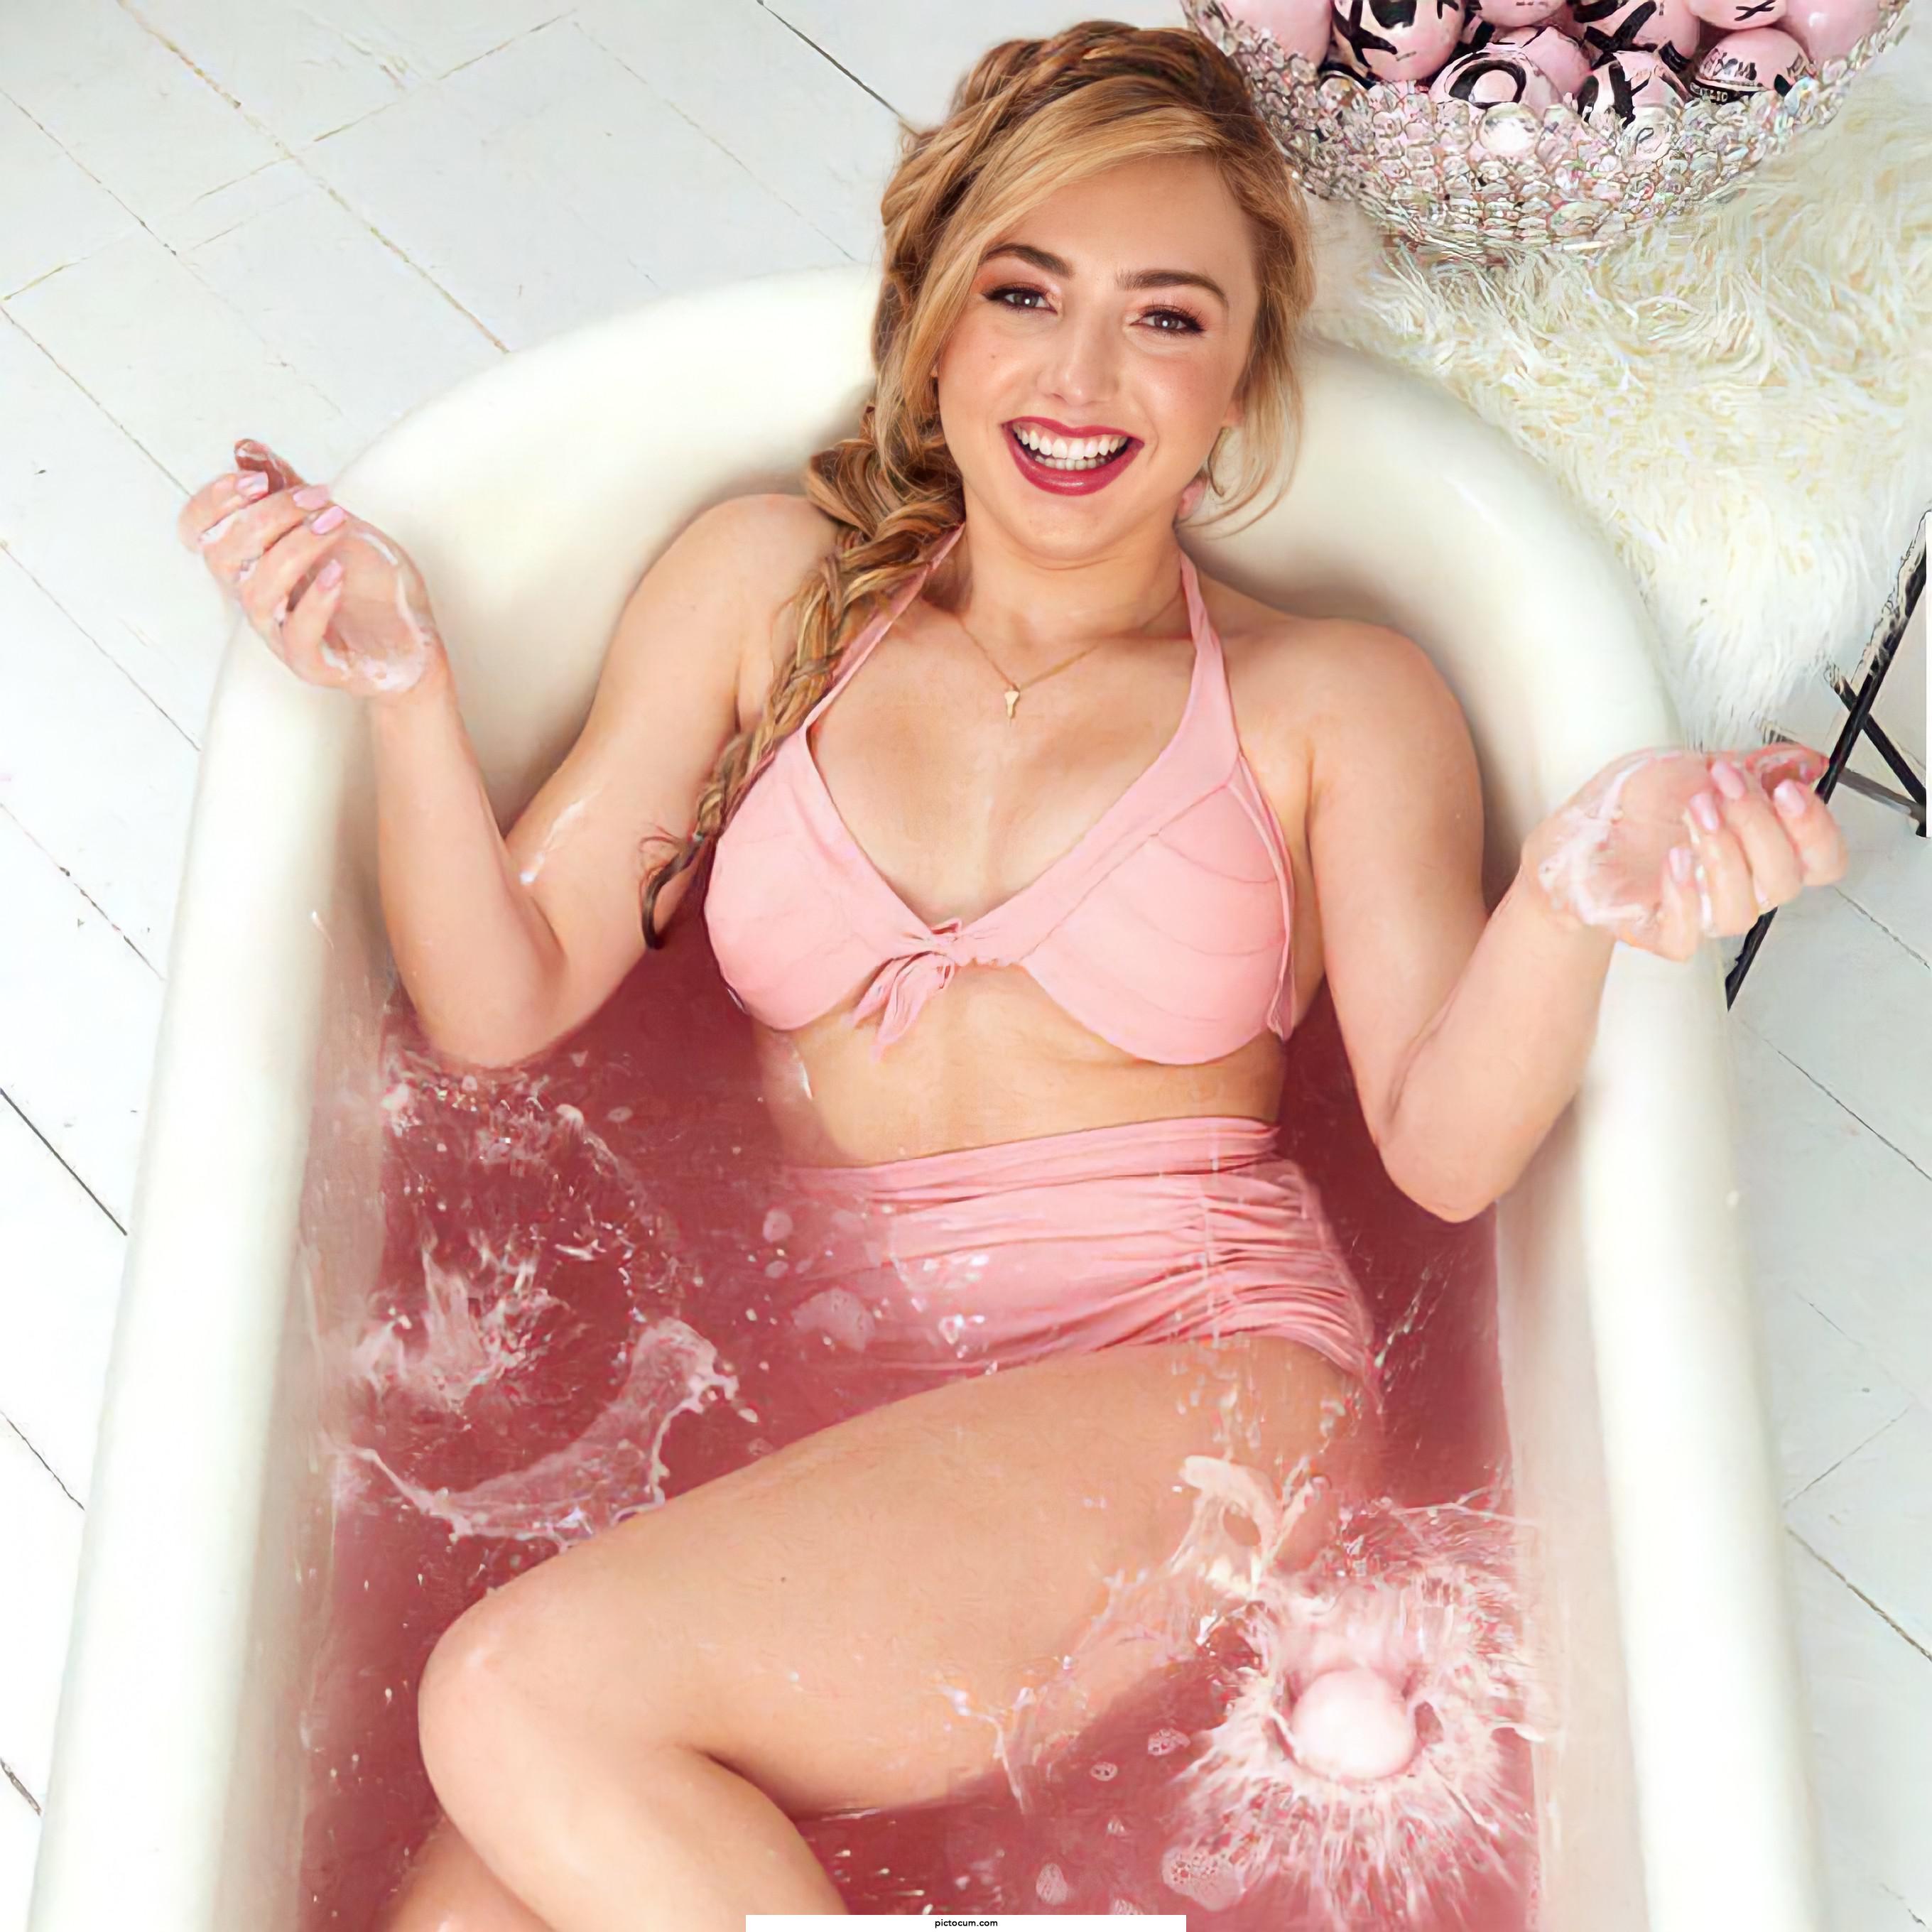 Peyton List needs to be fucked hard right in that tub.